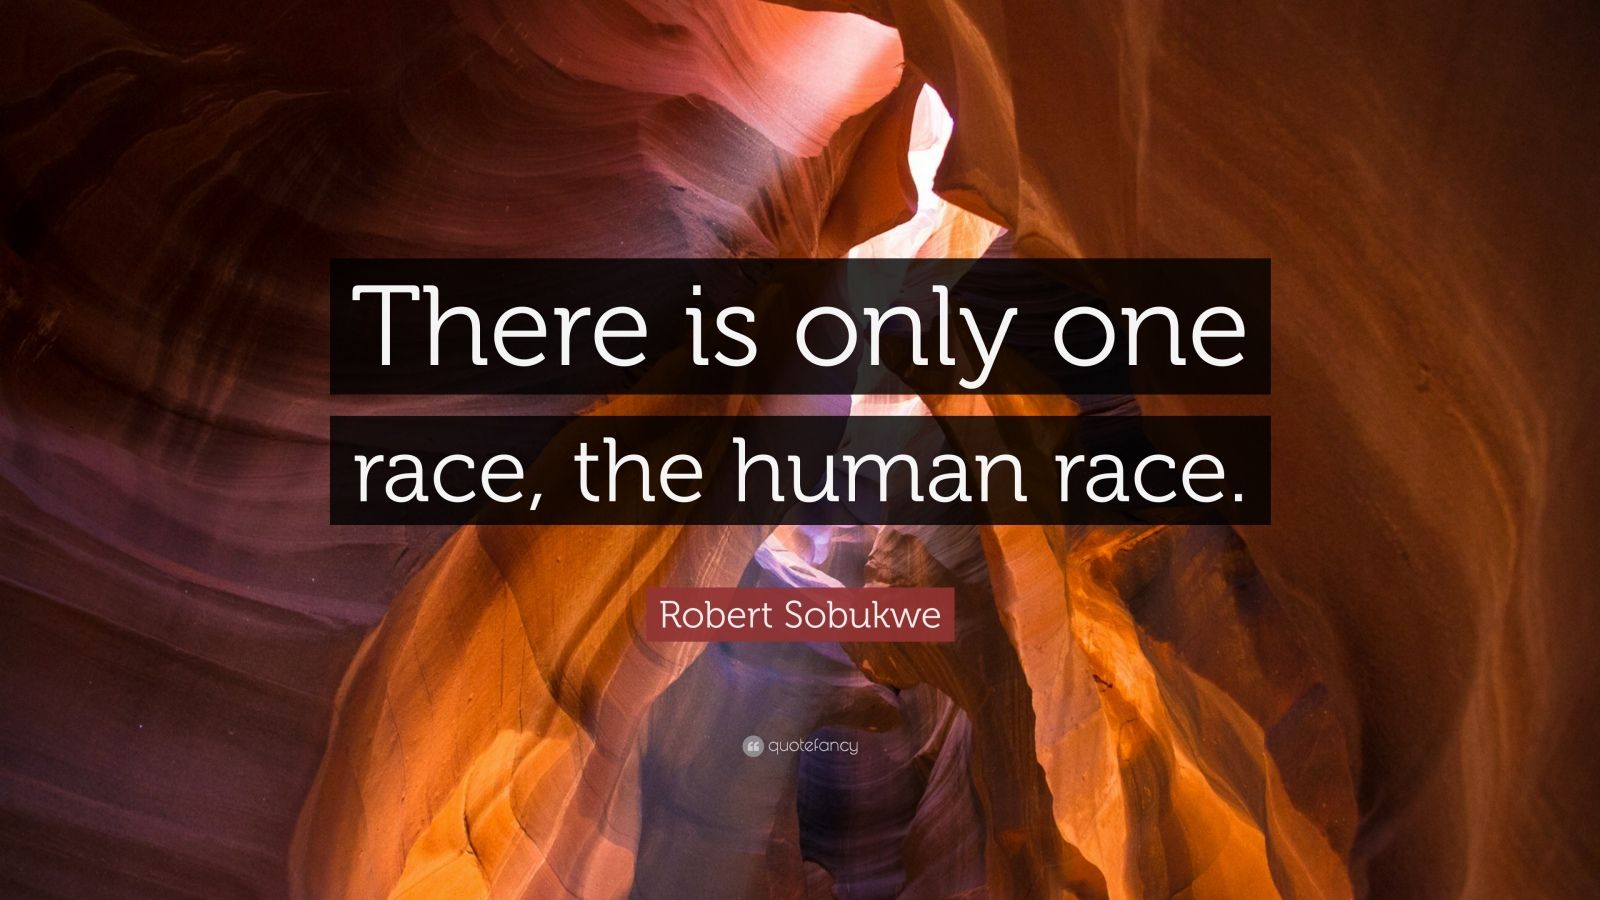 1620058-Robert-Sobukwe-Quote-There-is-only-one-race-the-human-race.jpg